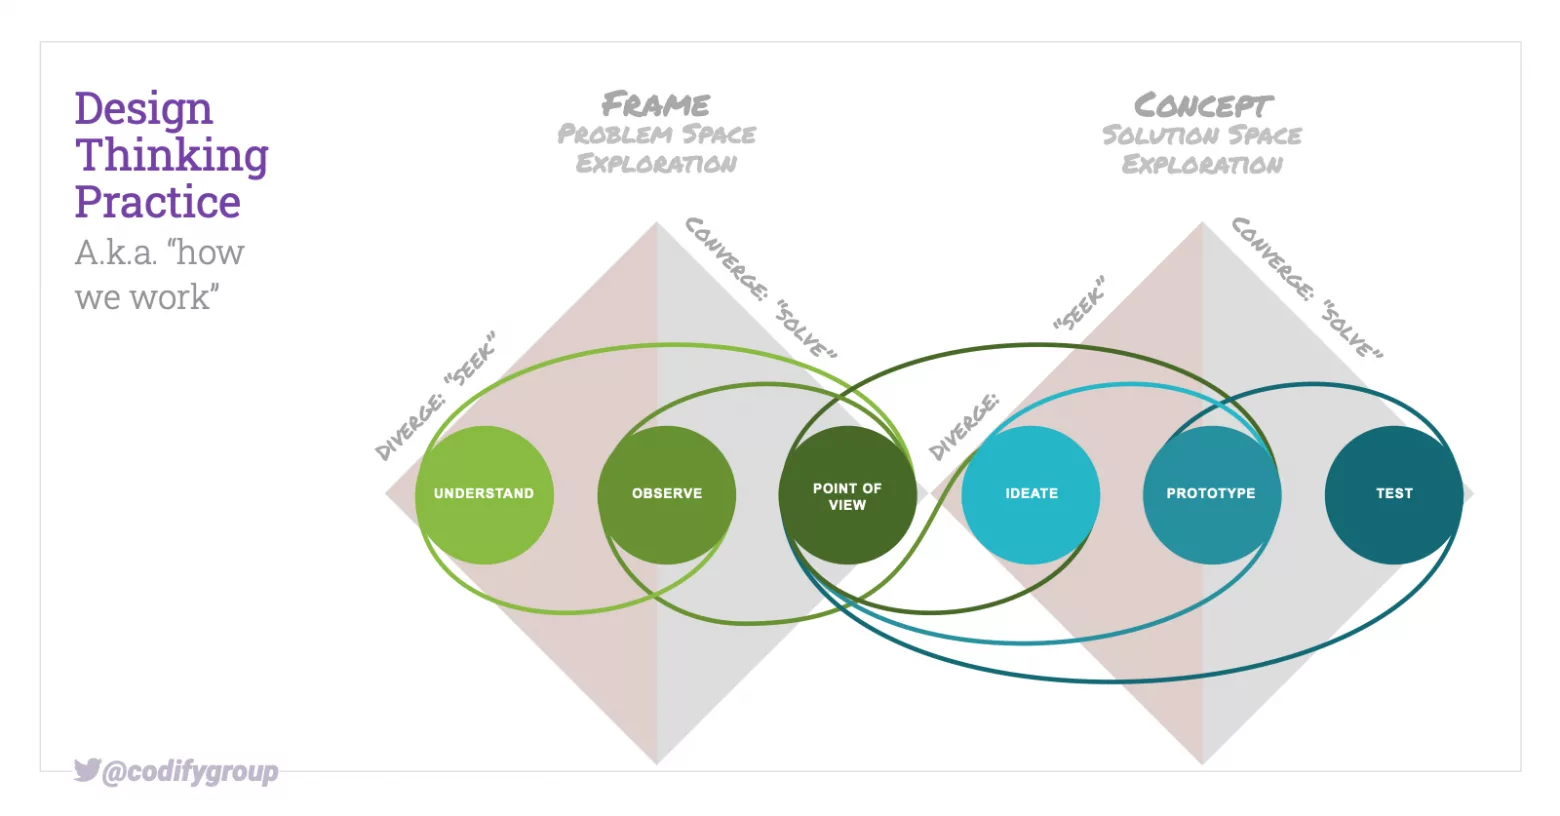 The design thinking process heavily borrows practices from other disciplines (e.g. ethnography)